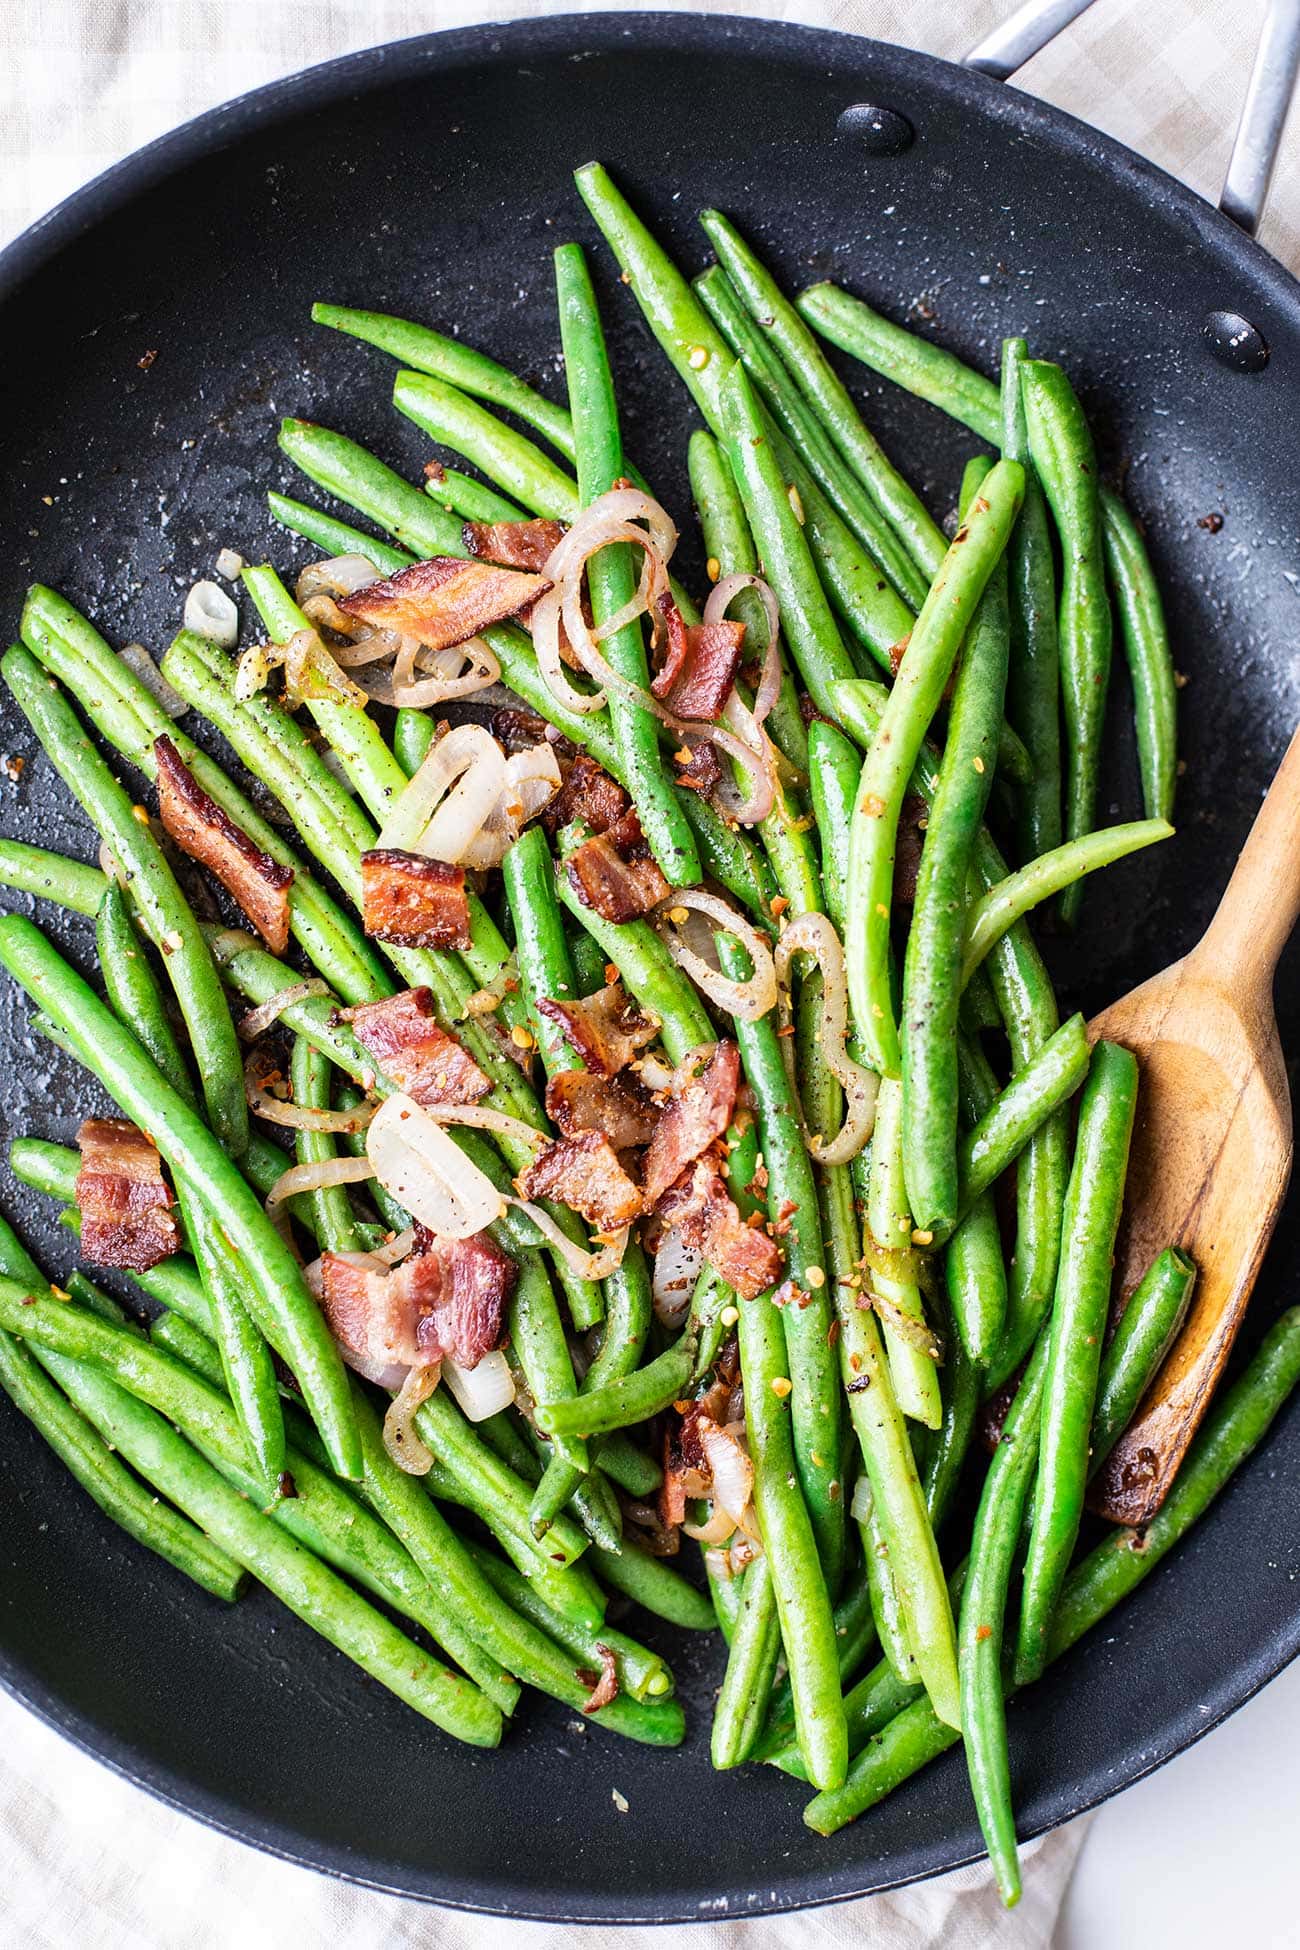 Vibrantly colored green beans sauteed and topped with crunchy bites of bacon.